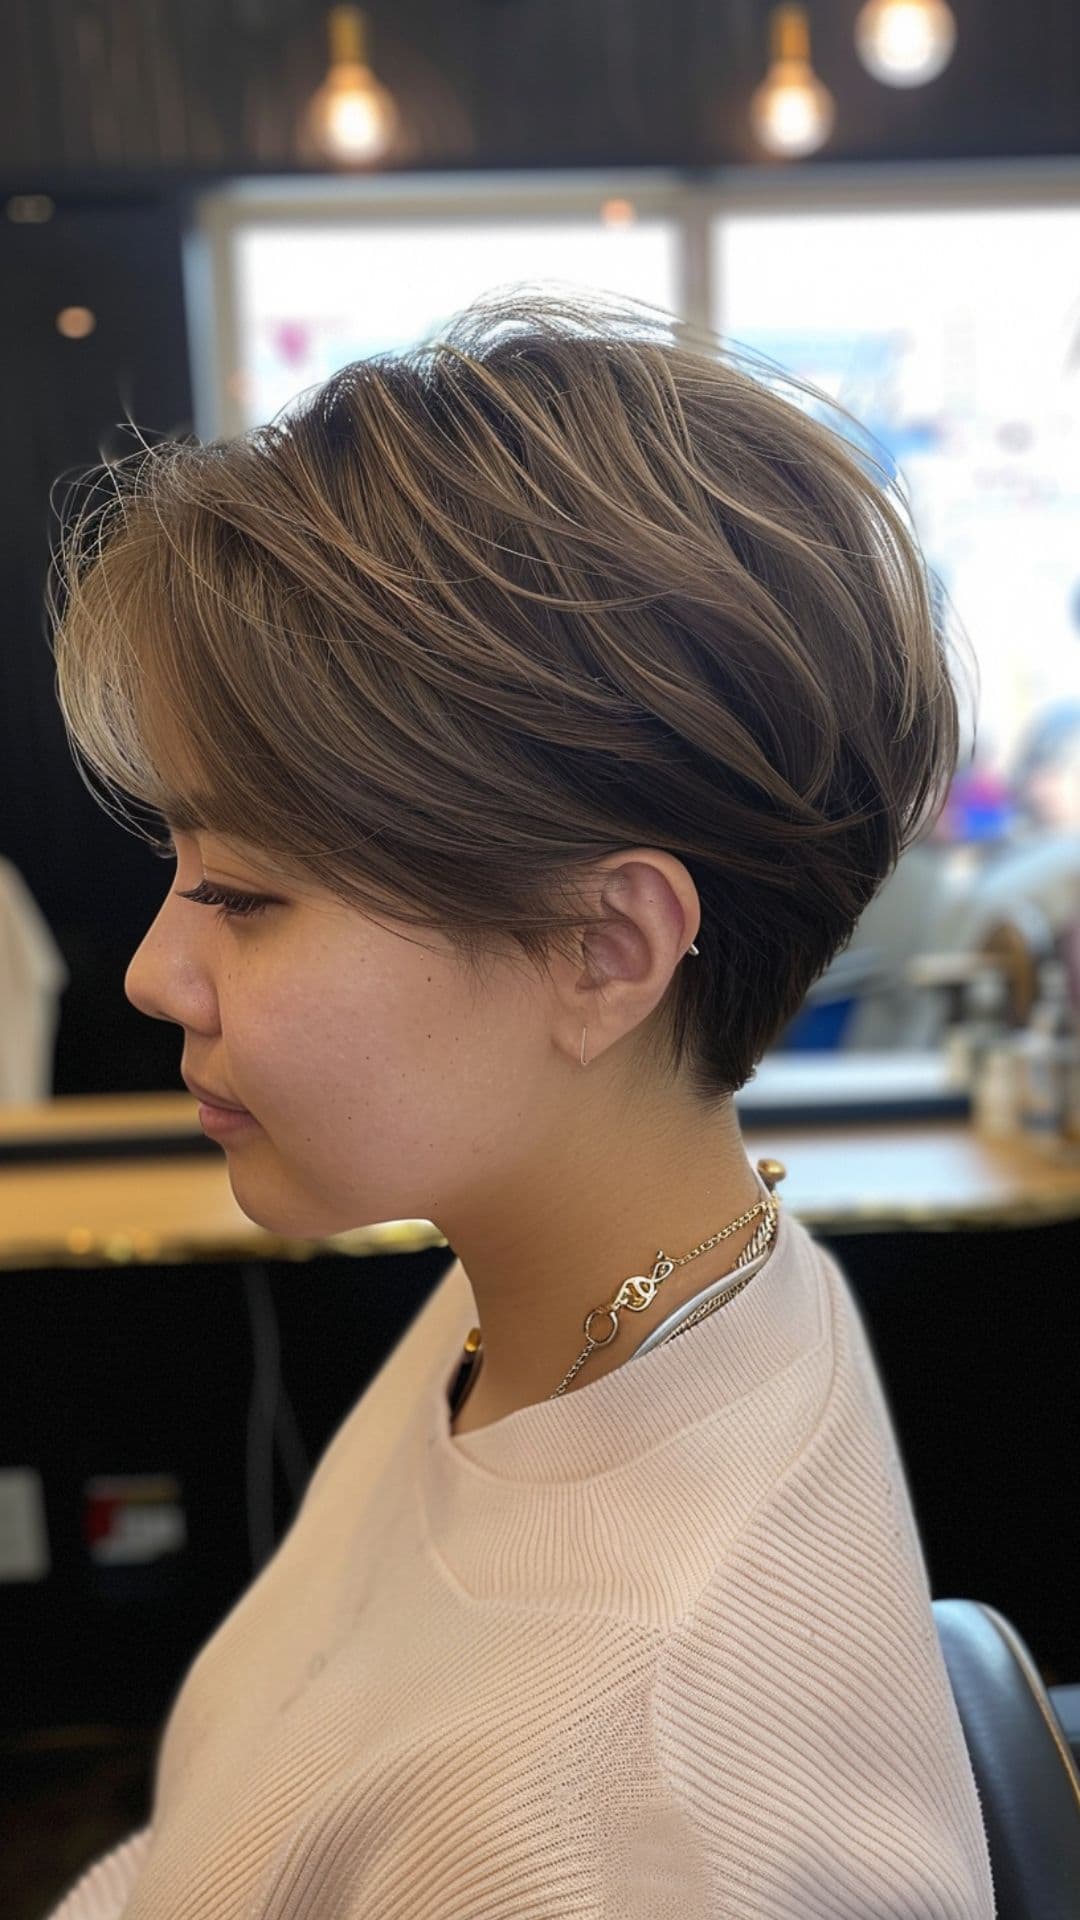 A woman modelling a graduated pixie cut with volume at the crown.